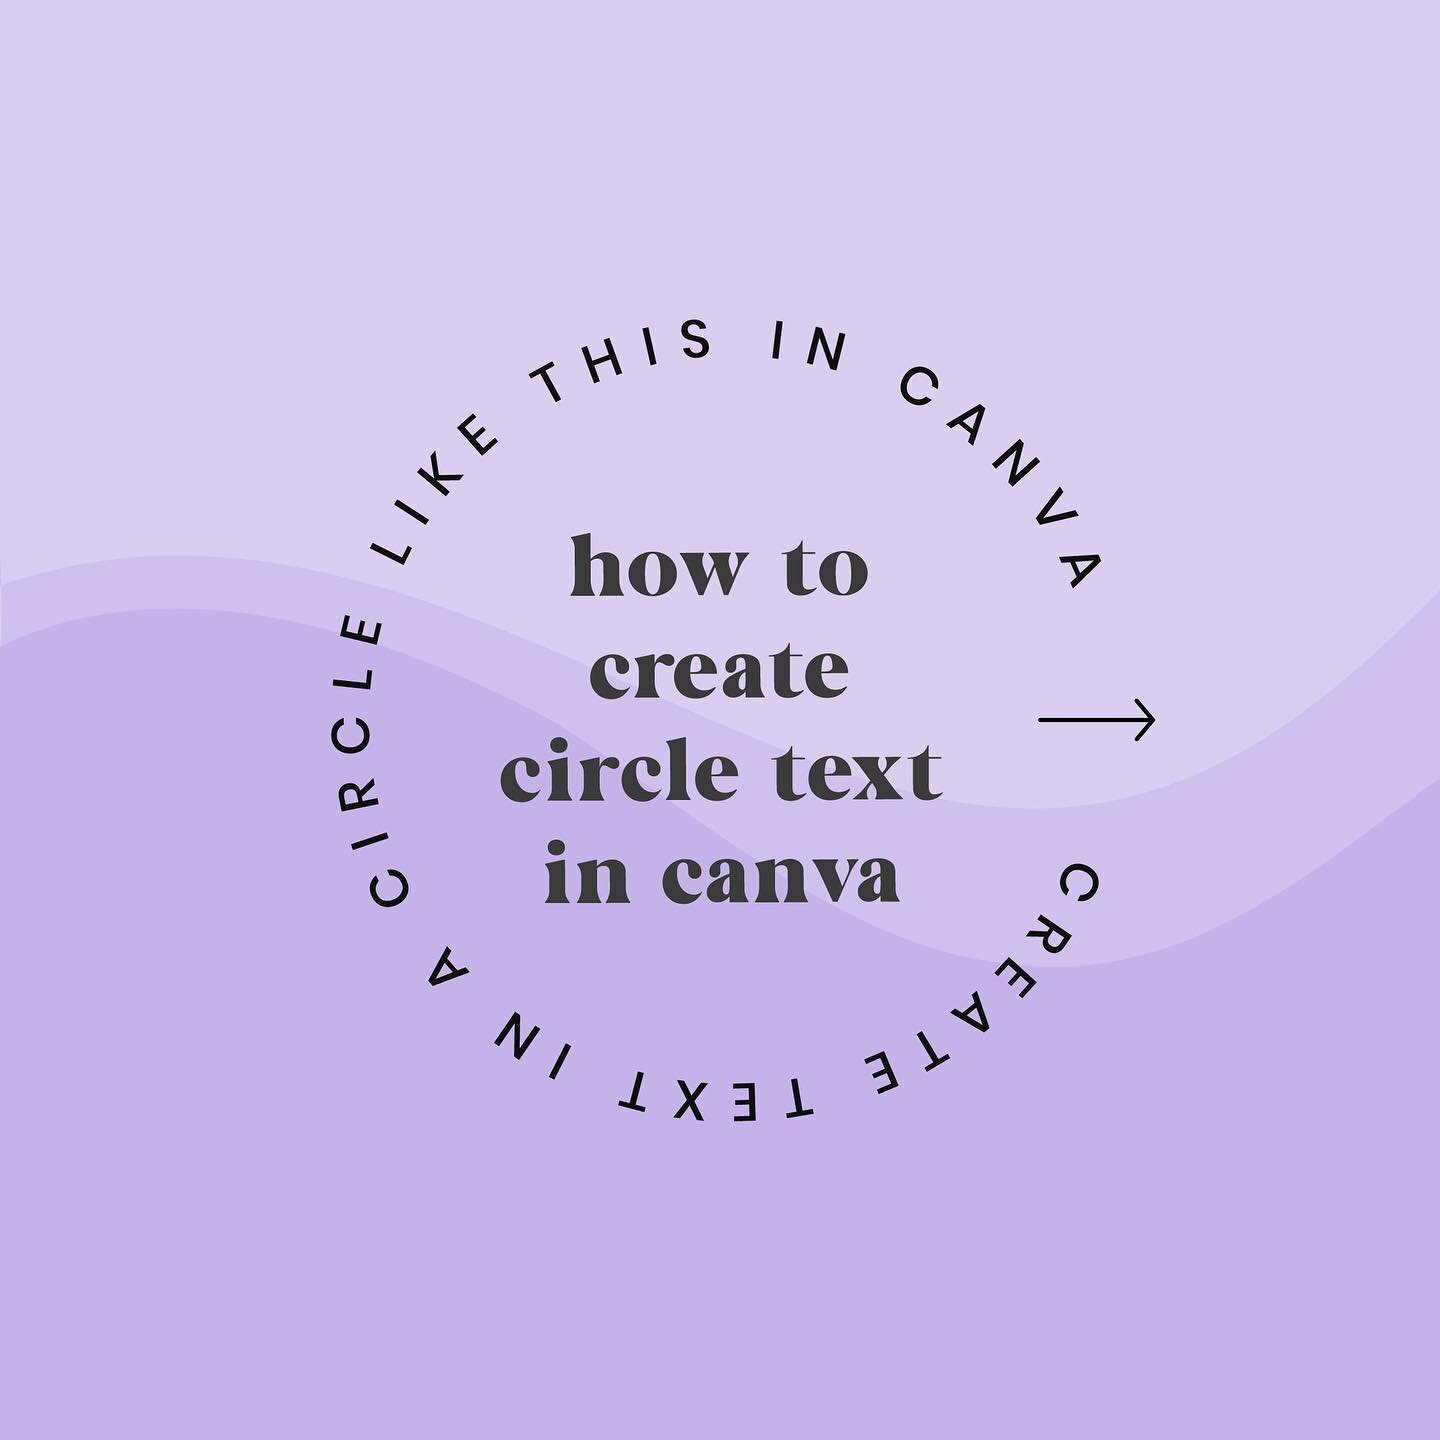 How to type your text in a Circle in @Canva - LOVE this feature by Canva. Seriously, they've added so much fun stuff recently, and this is a highlight! Have you tried it out yet? 😀